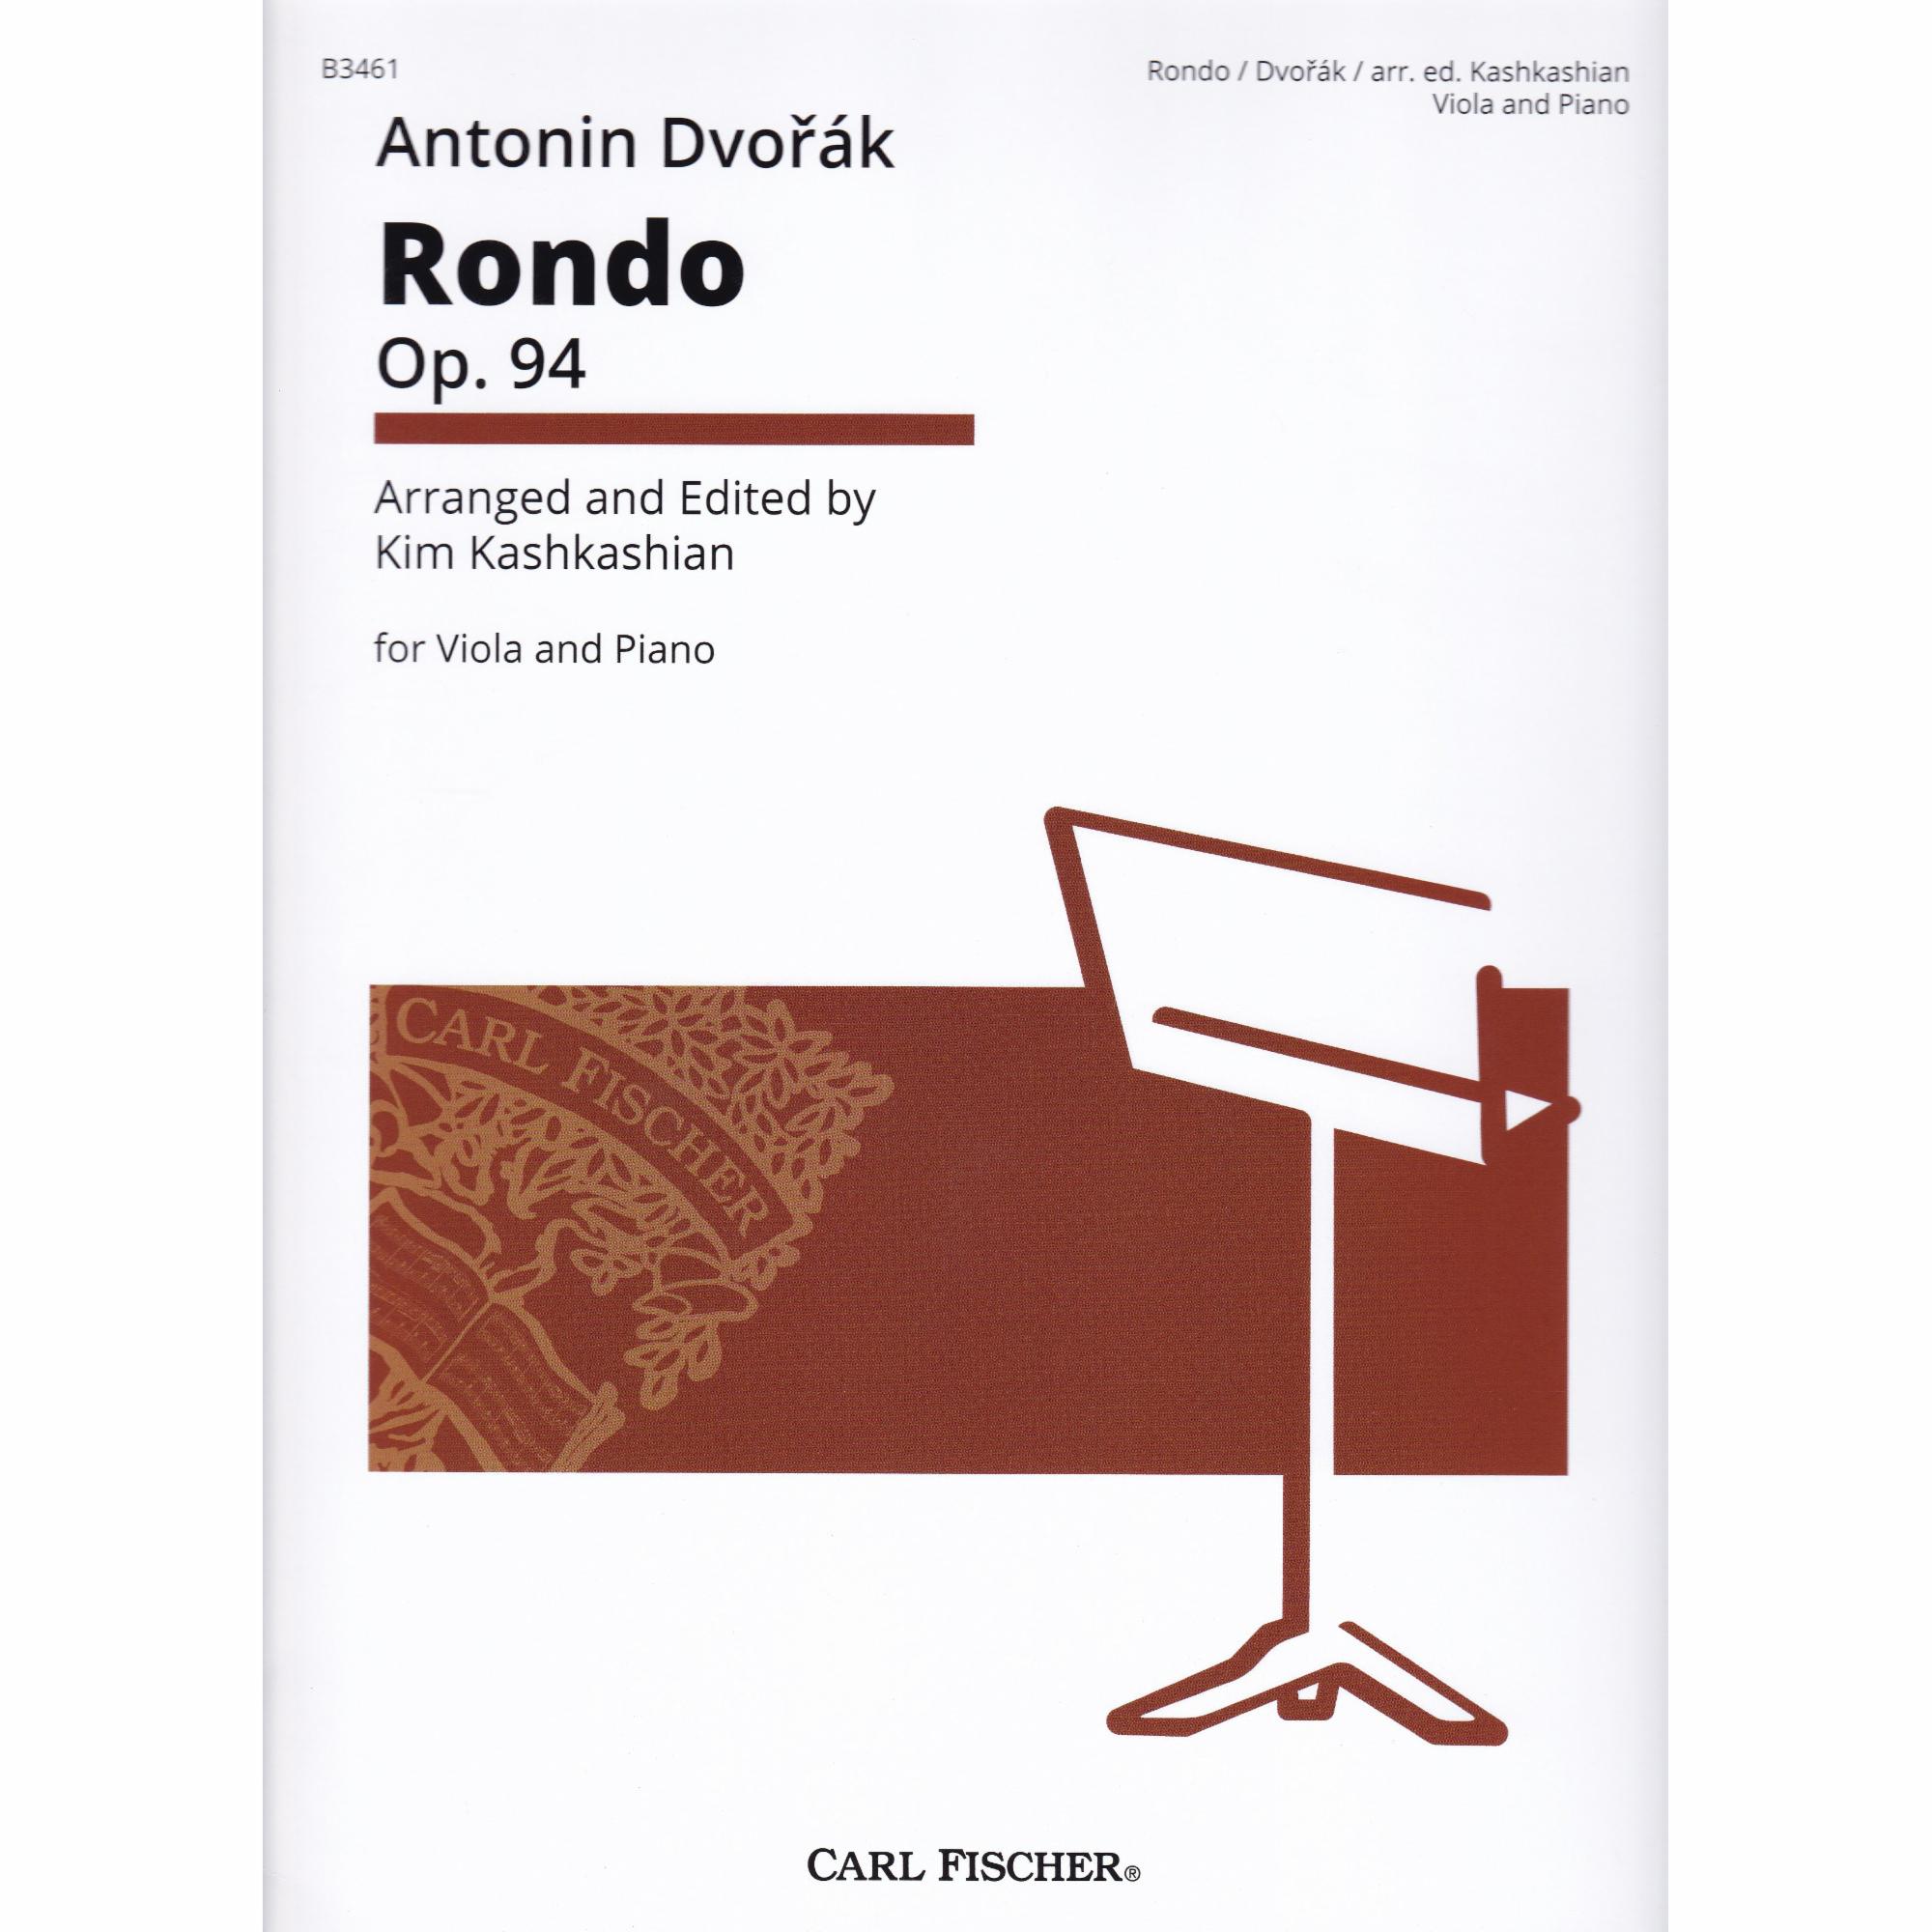 Rondo in G Minor for Viola and Piano, Op. 94